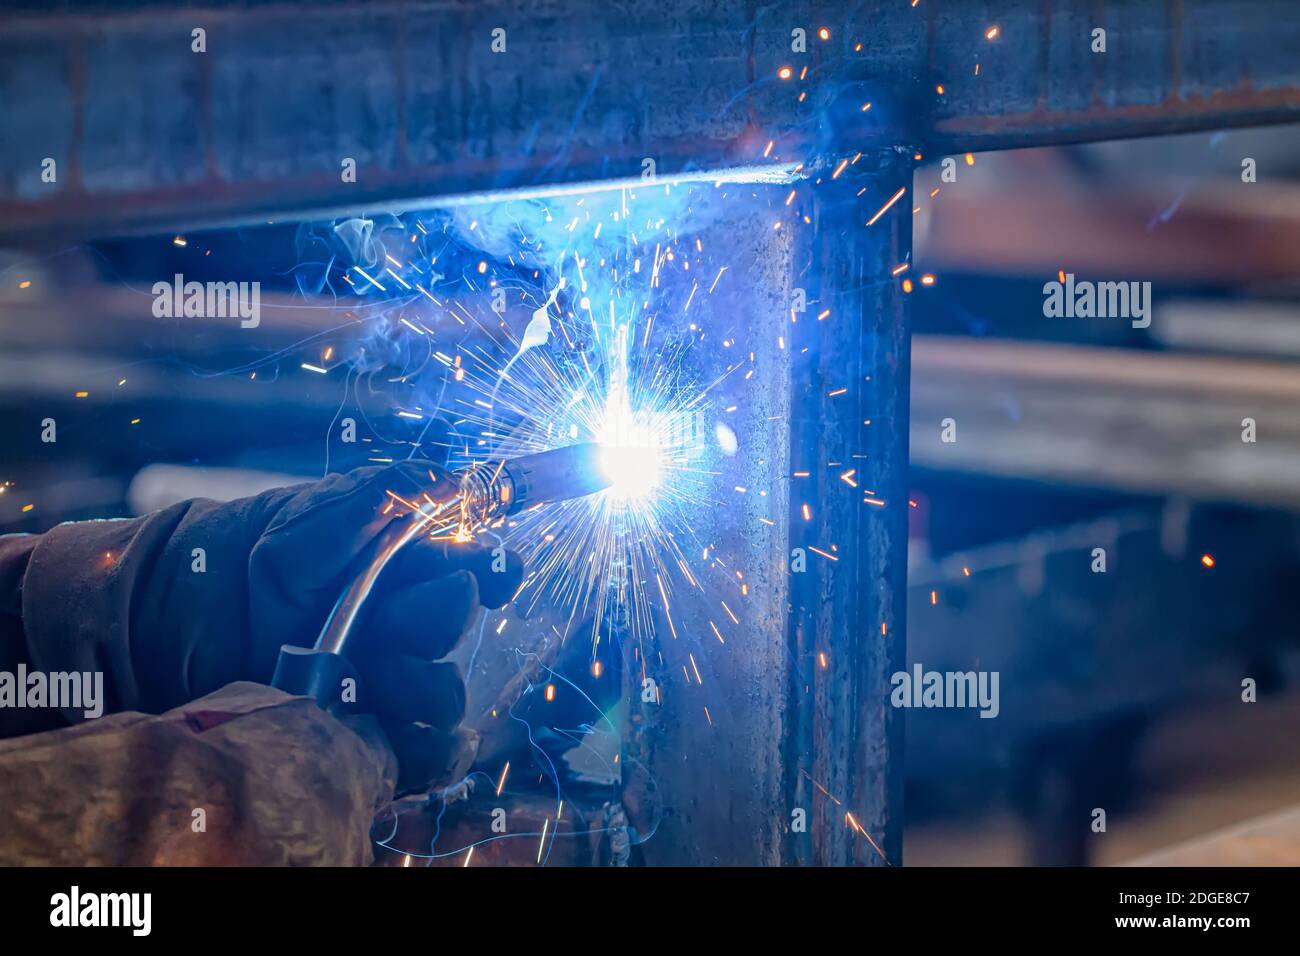 Semi-automatic welding with sparks and smoke Stock Photo